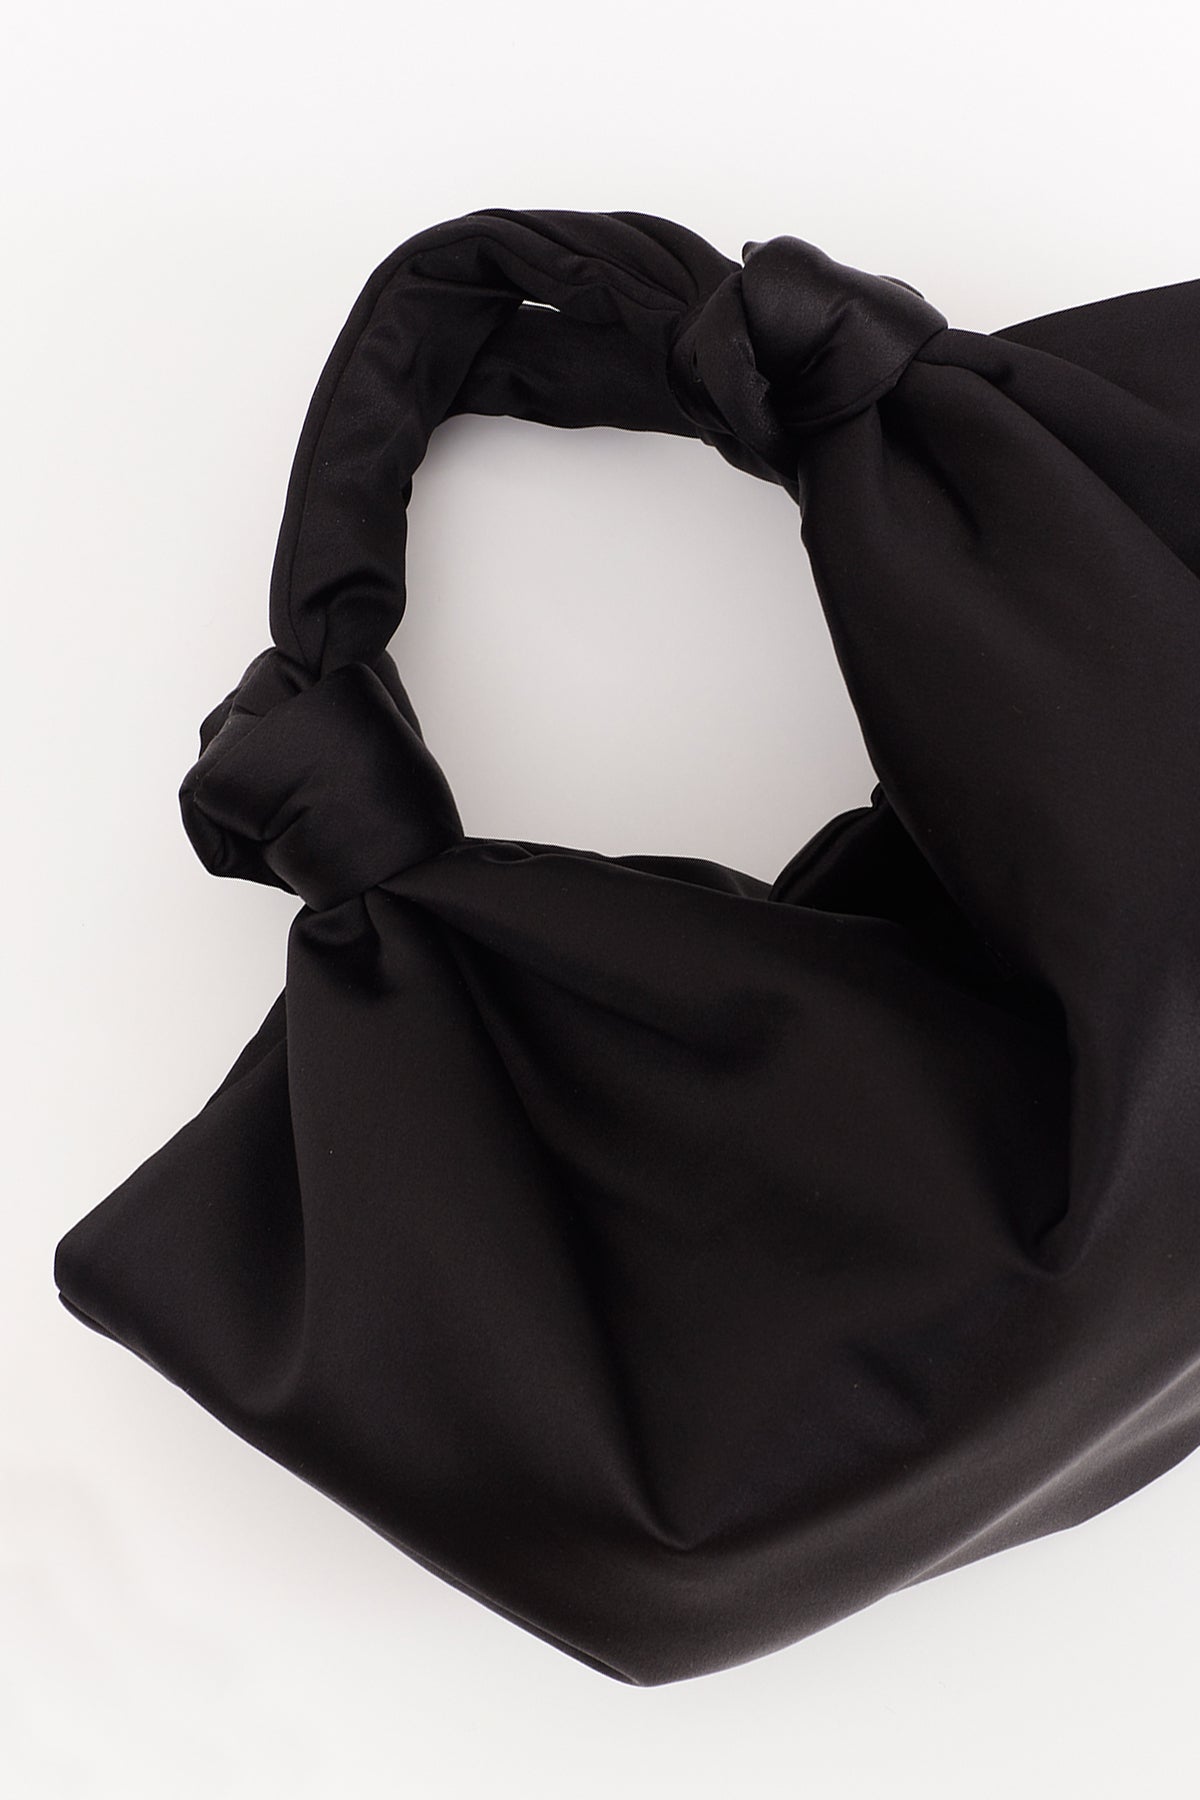   A ROBYN BAG by Velvet by Jenny Graham, a luxury handbag made of black satin with a knot on it. 